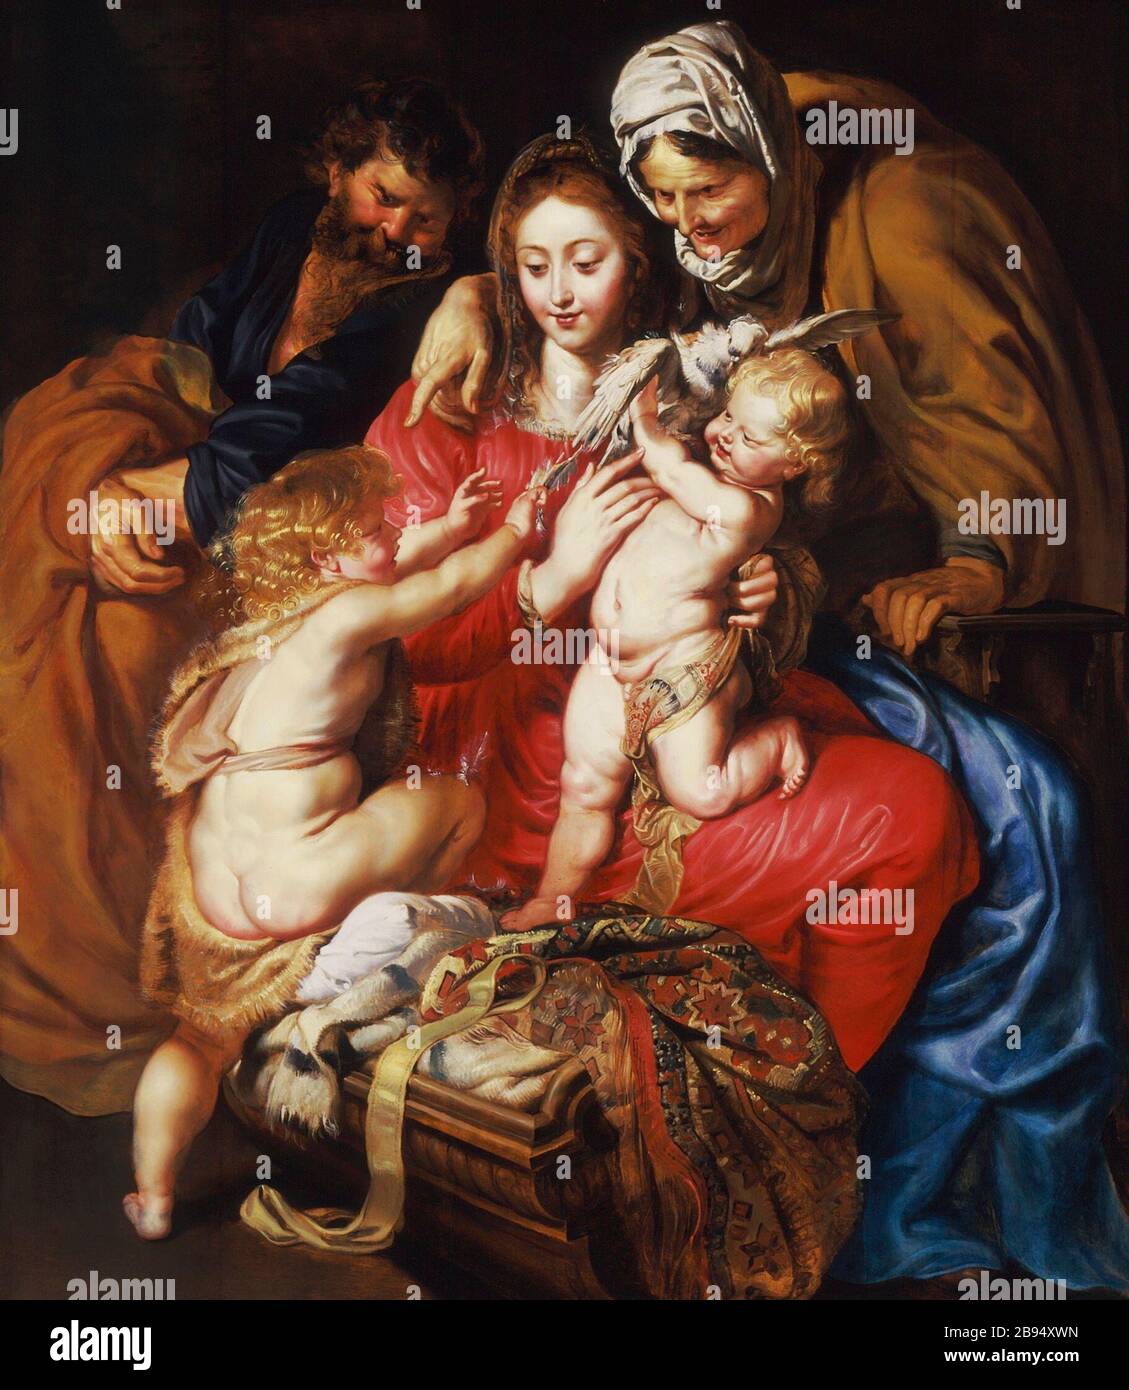 'The Holy Family with St. Elizabeth, St. John, and a Dove; English:  Holland, circa 1609 Paintings Oil on wood Colonel and Mrs. George J. Denis Fund (53.27) European Painting Currently on public view: Ahmanson Building, floor 3; circa 1609 date QS:P571,+1609-00-00T00:00:00Z/9,P1480,Q5727902; ' Stock Photo